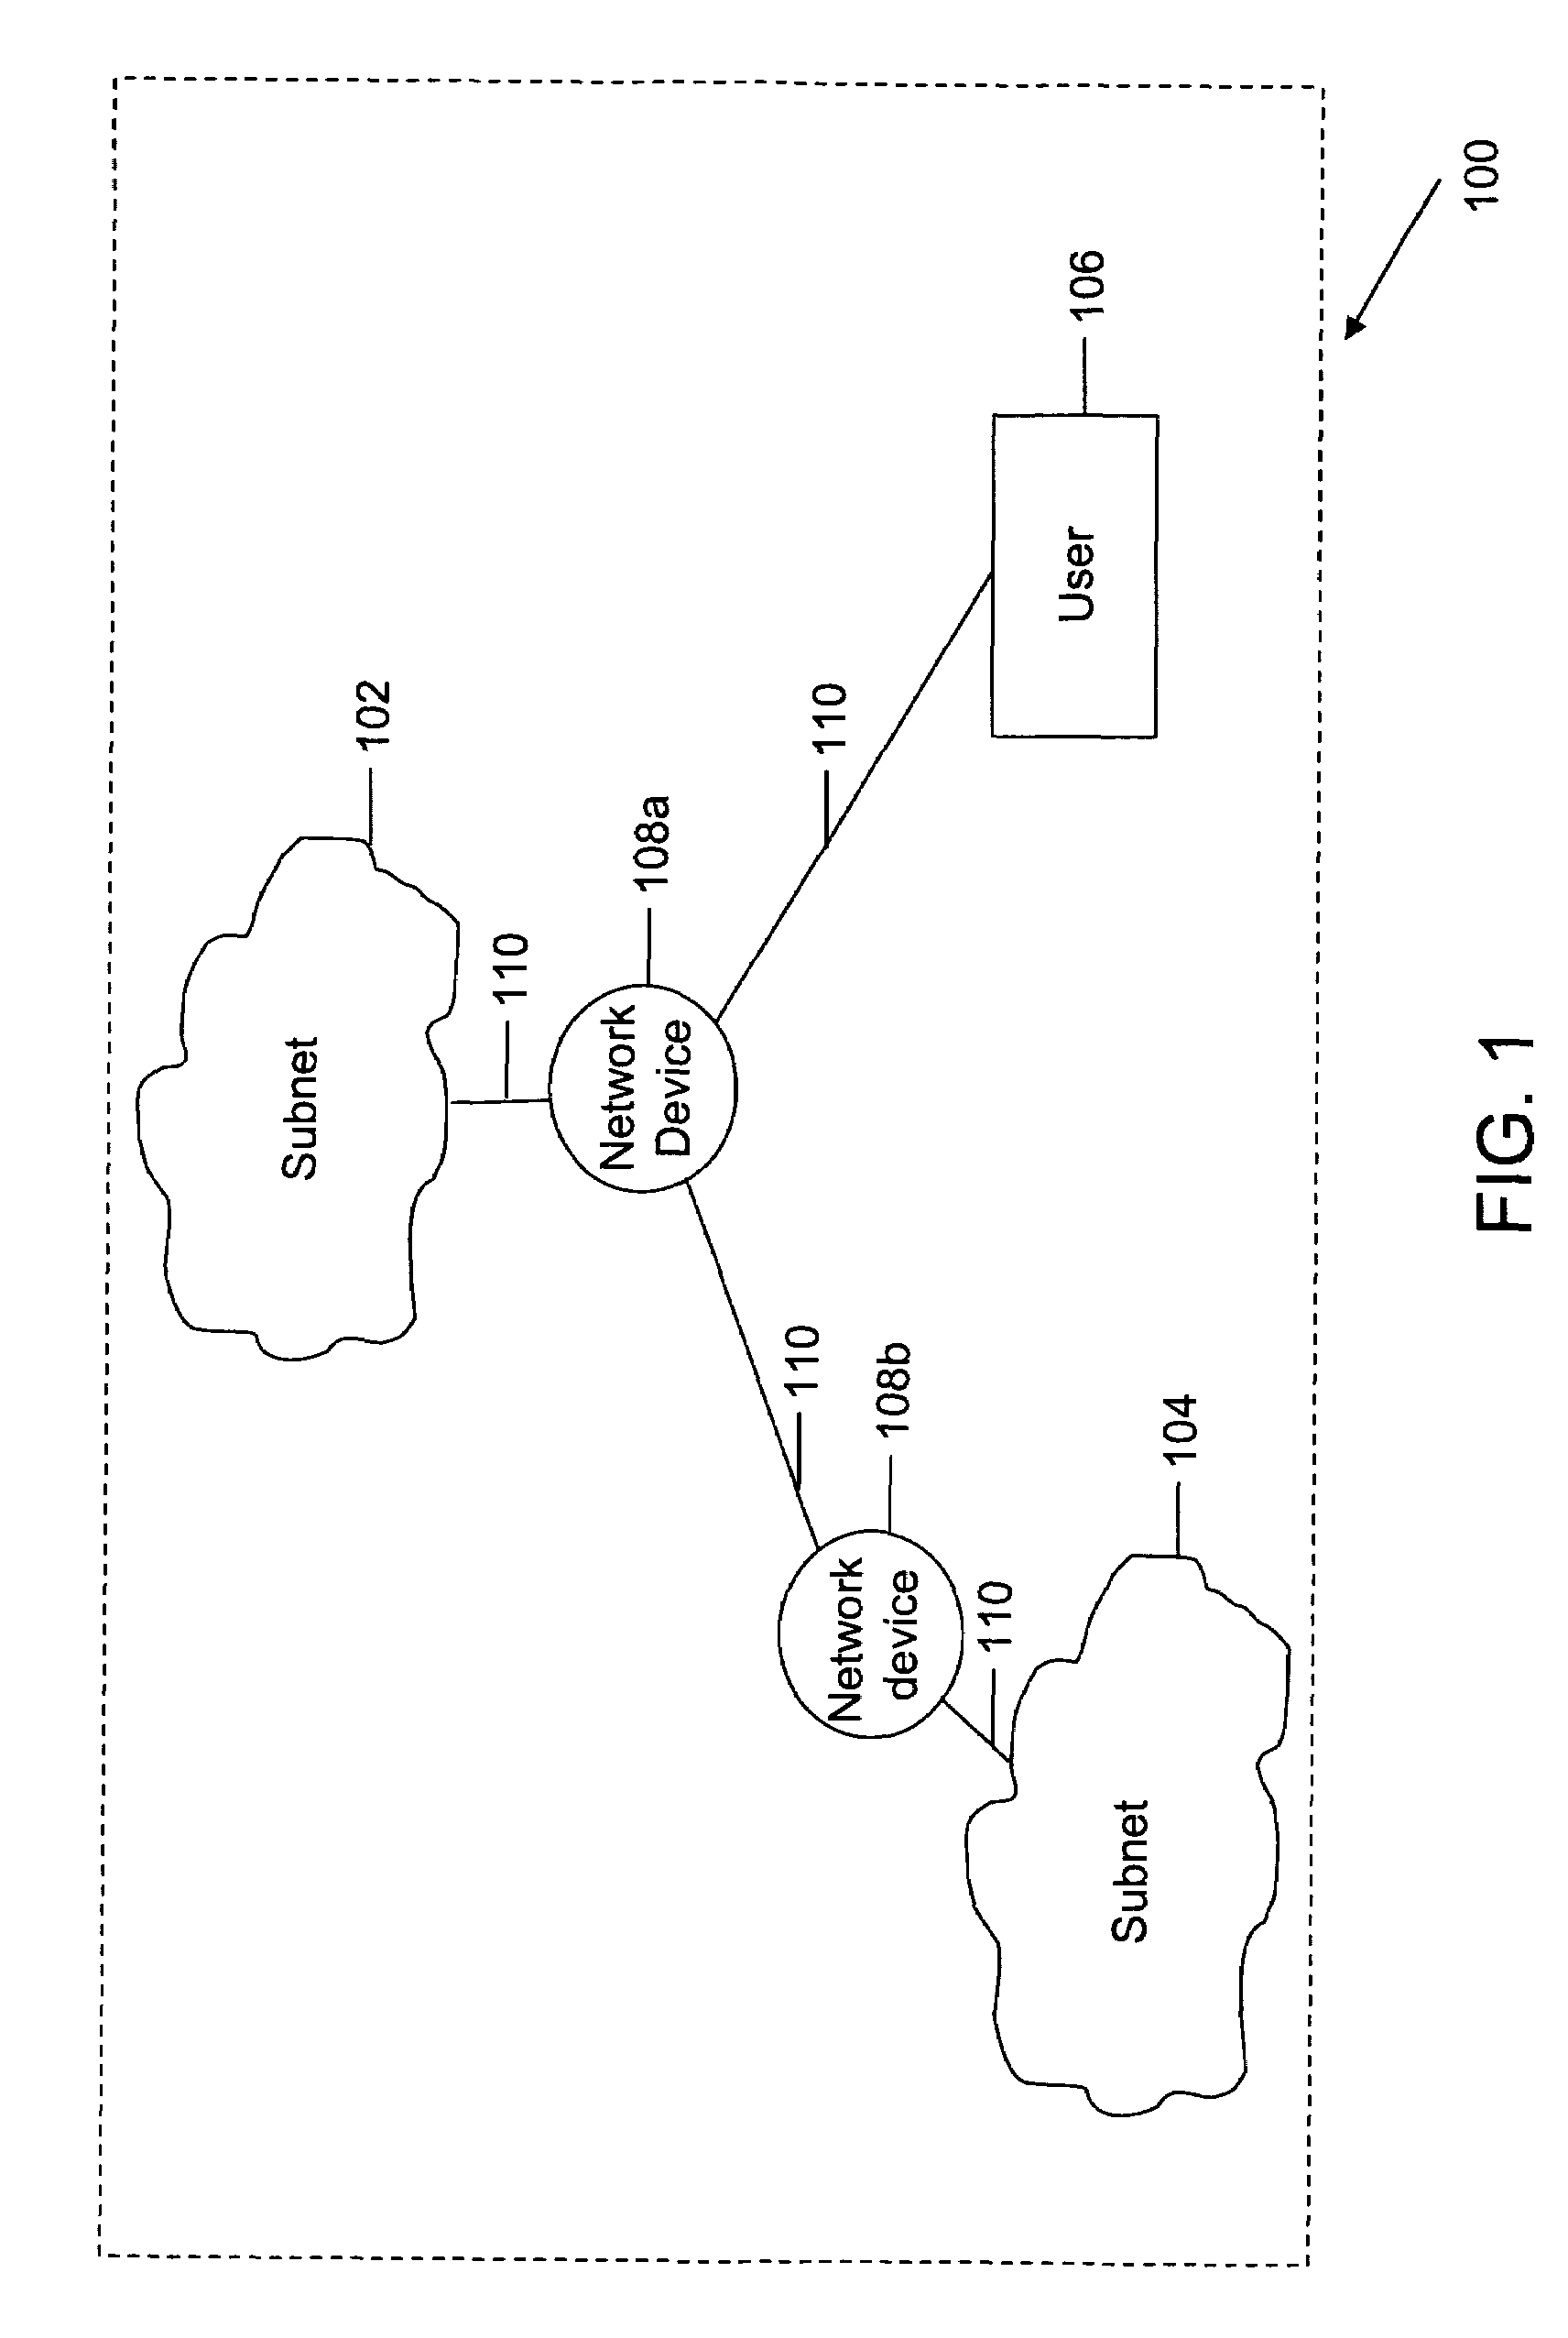 Method and system for testing provisioned services in a network